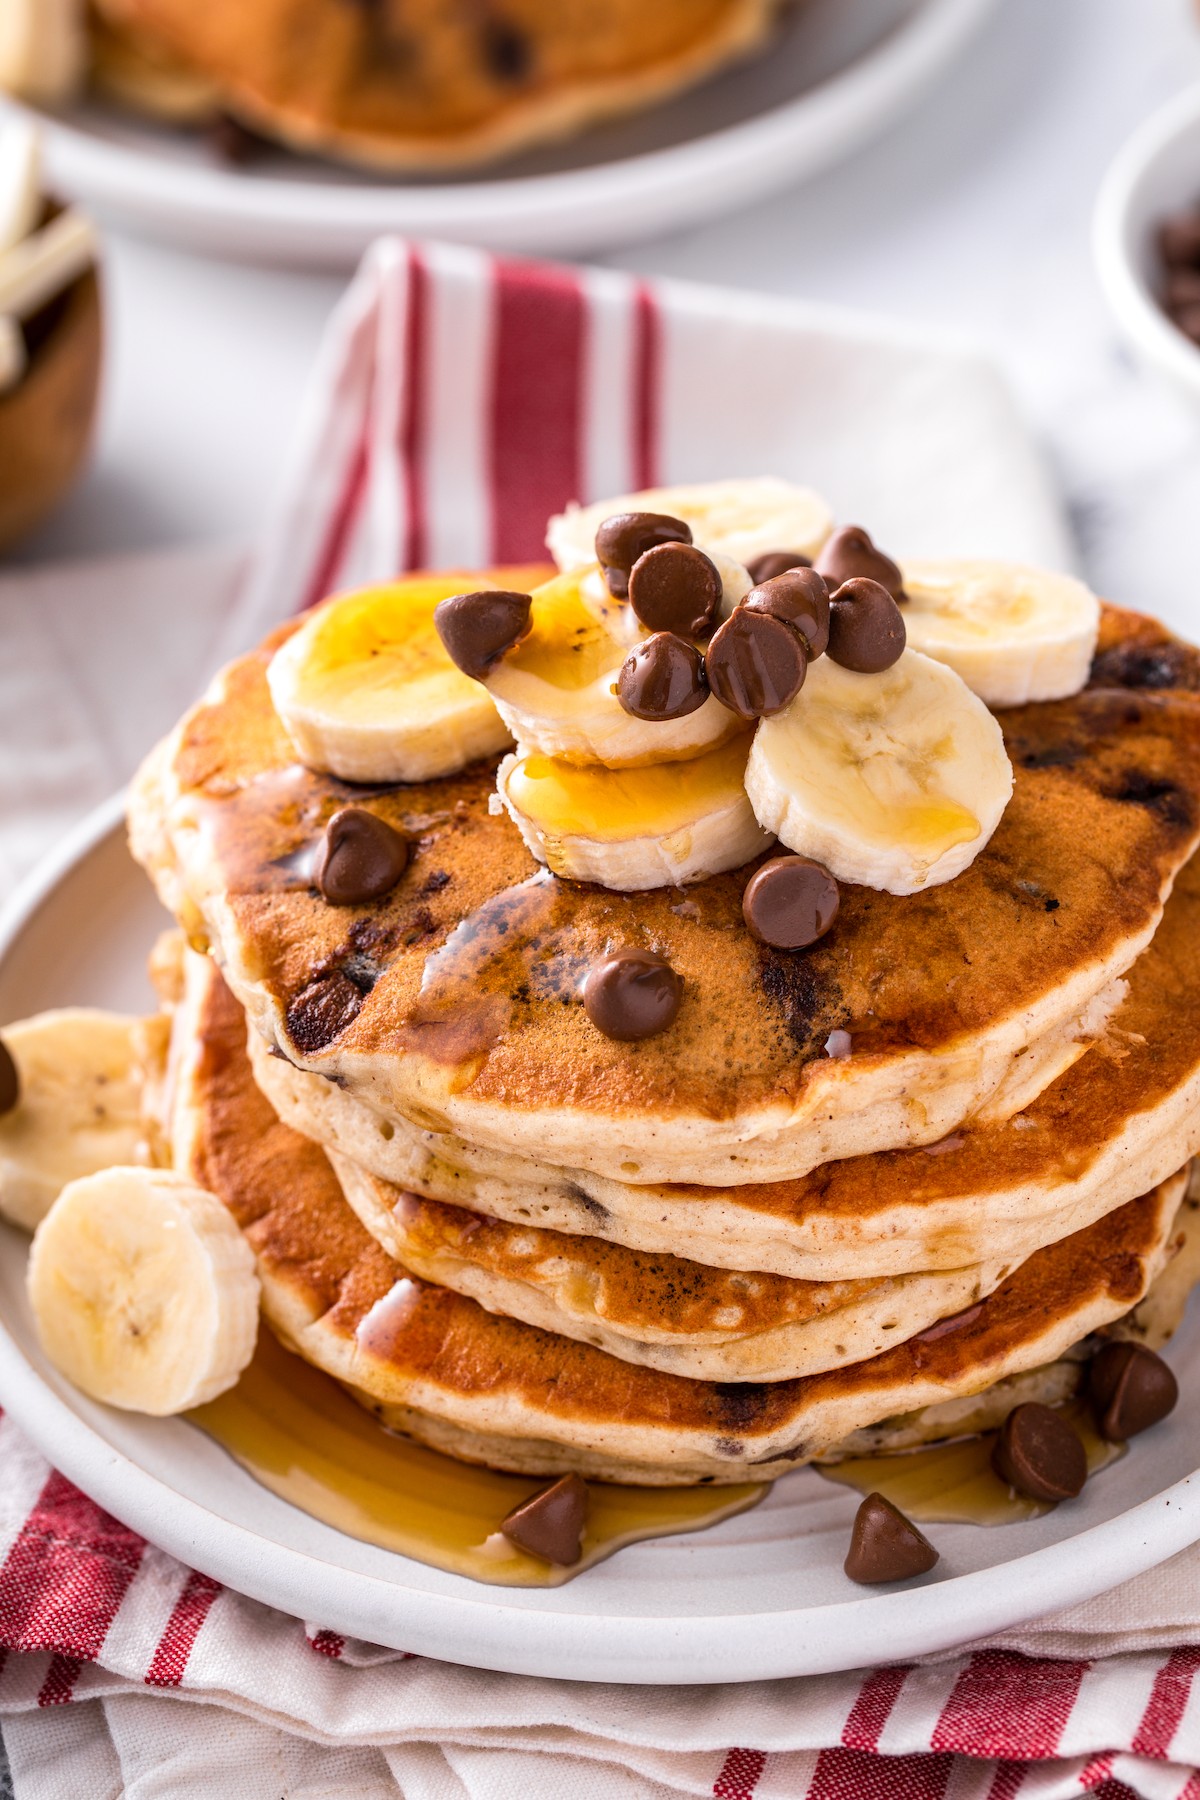 A plate of banana chocolate chip pancakes topped with sliced bananas and chocolate chips